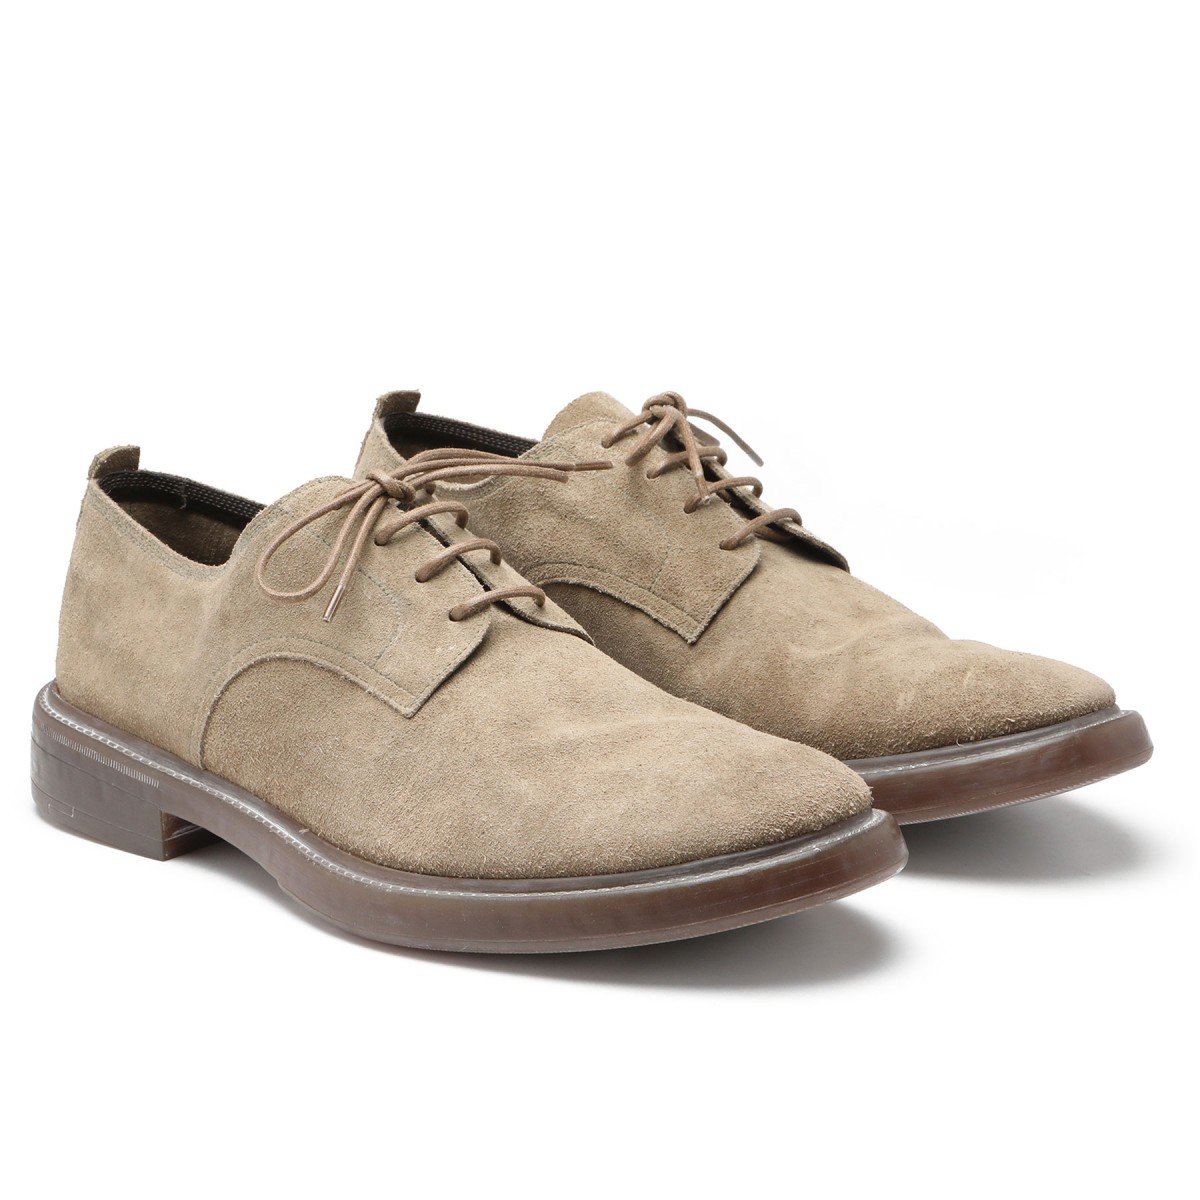 Taupe suede lace-up shoes